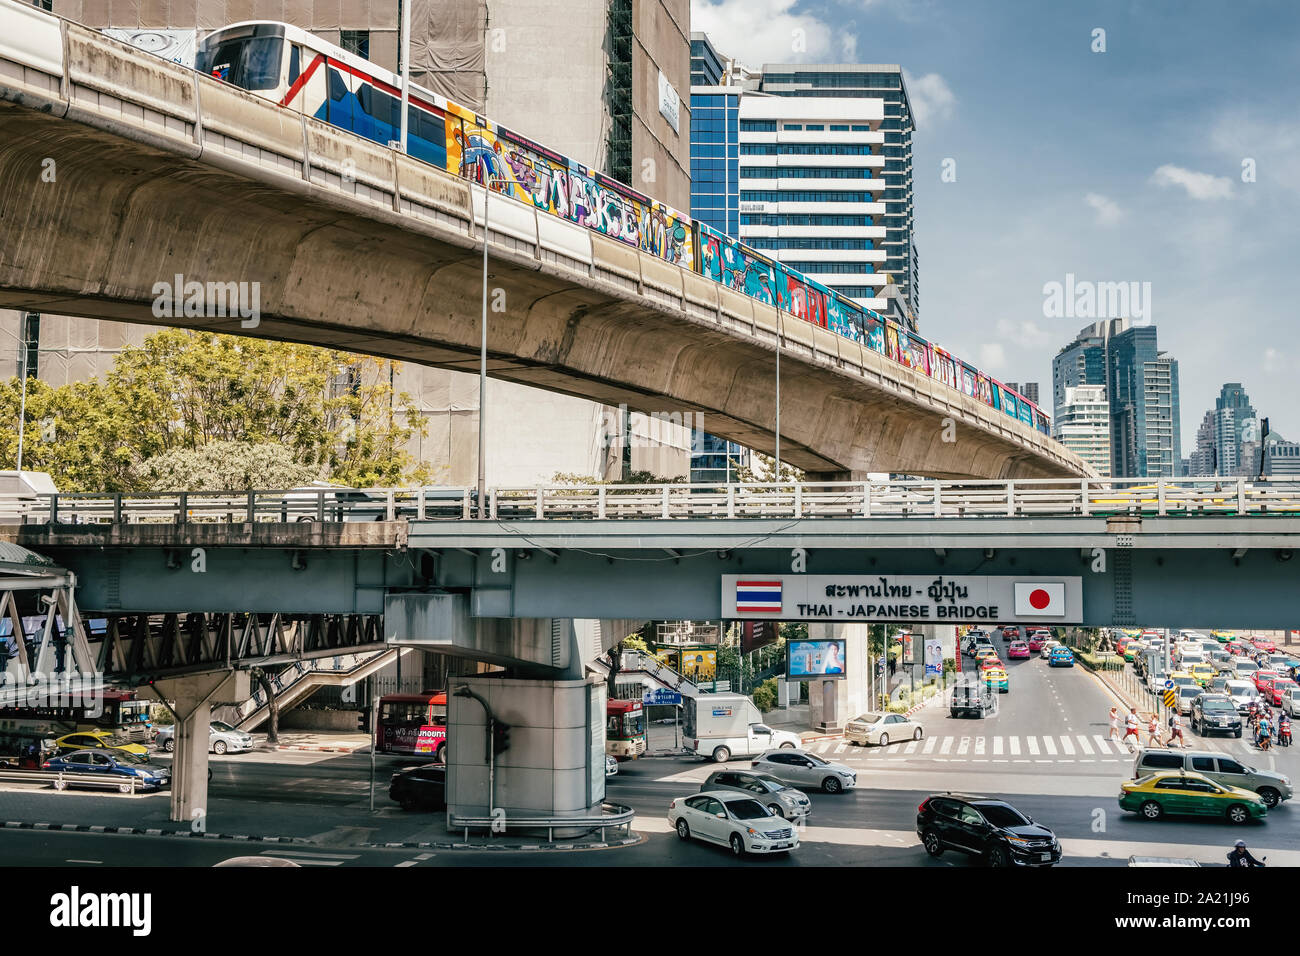 BTS train passing over Thai Japaniese brinde intersection in Bangkok, Thailand. Stock Photo